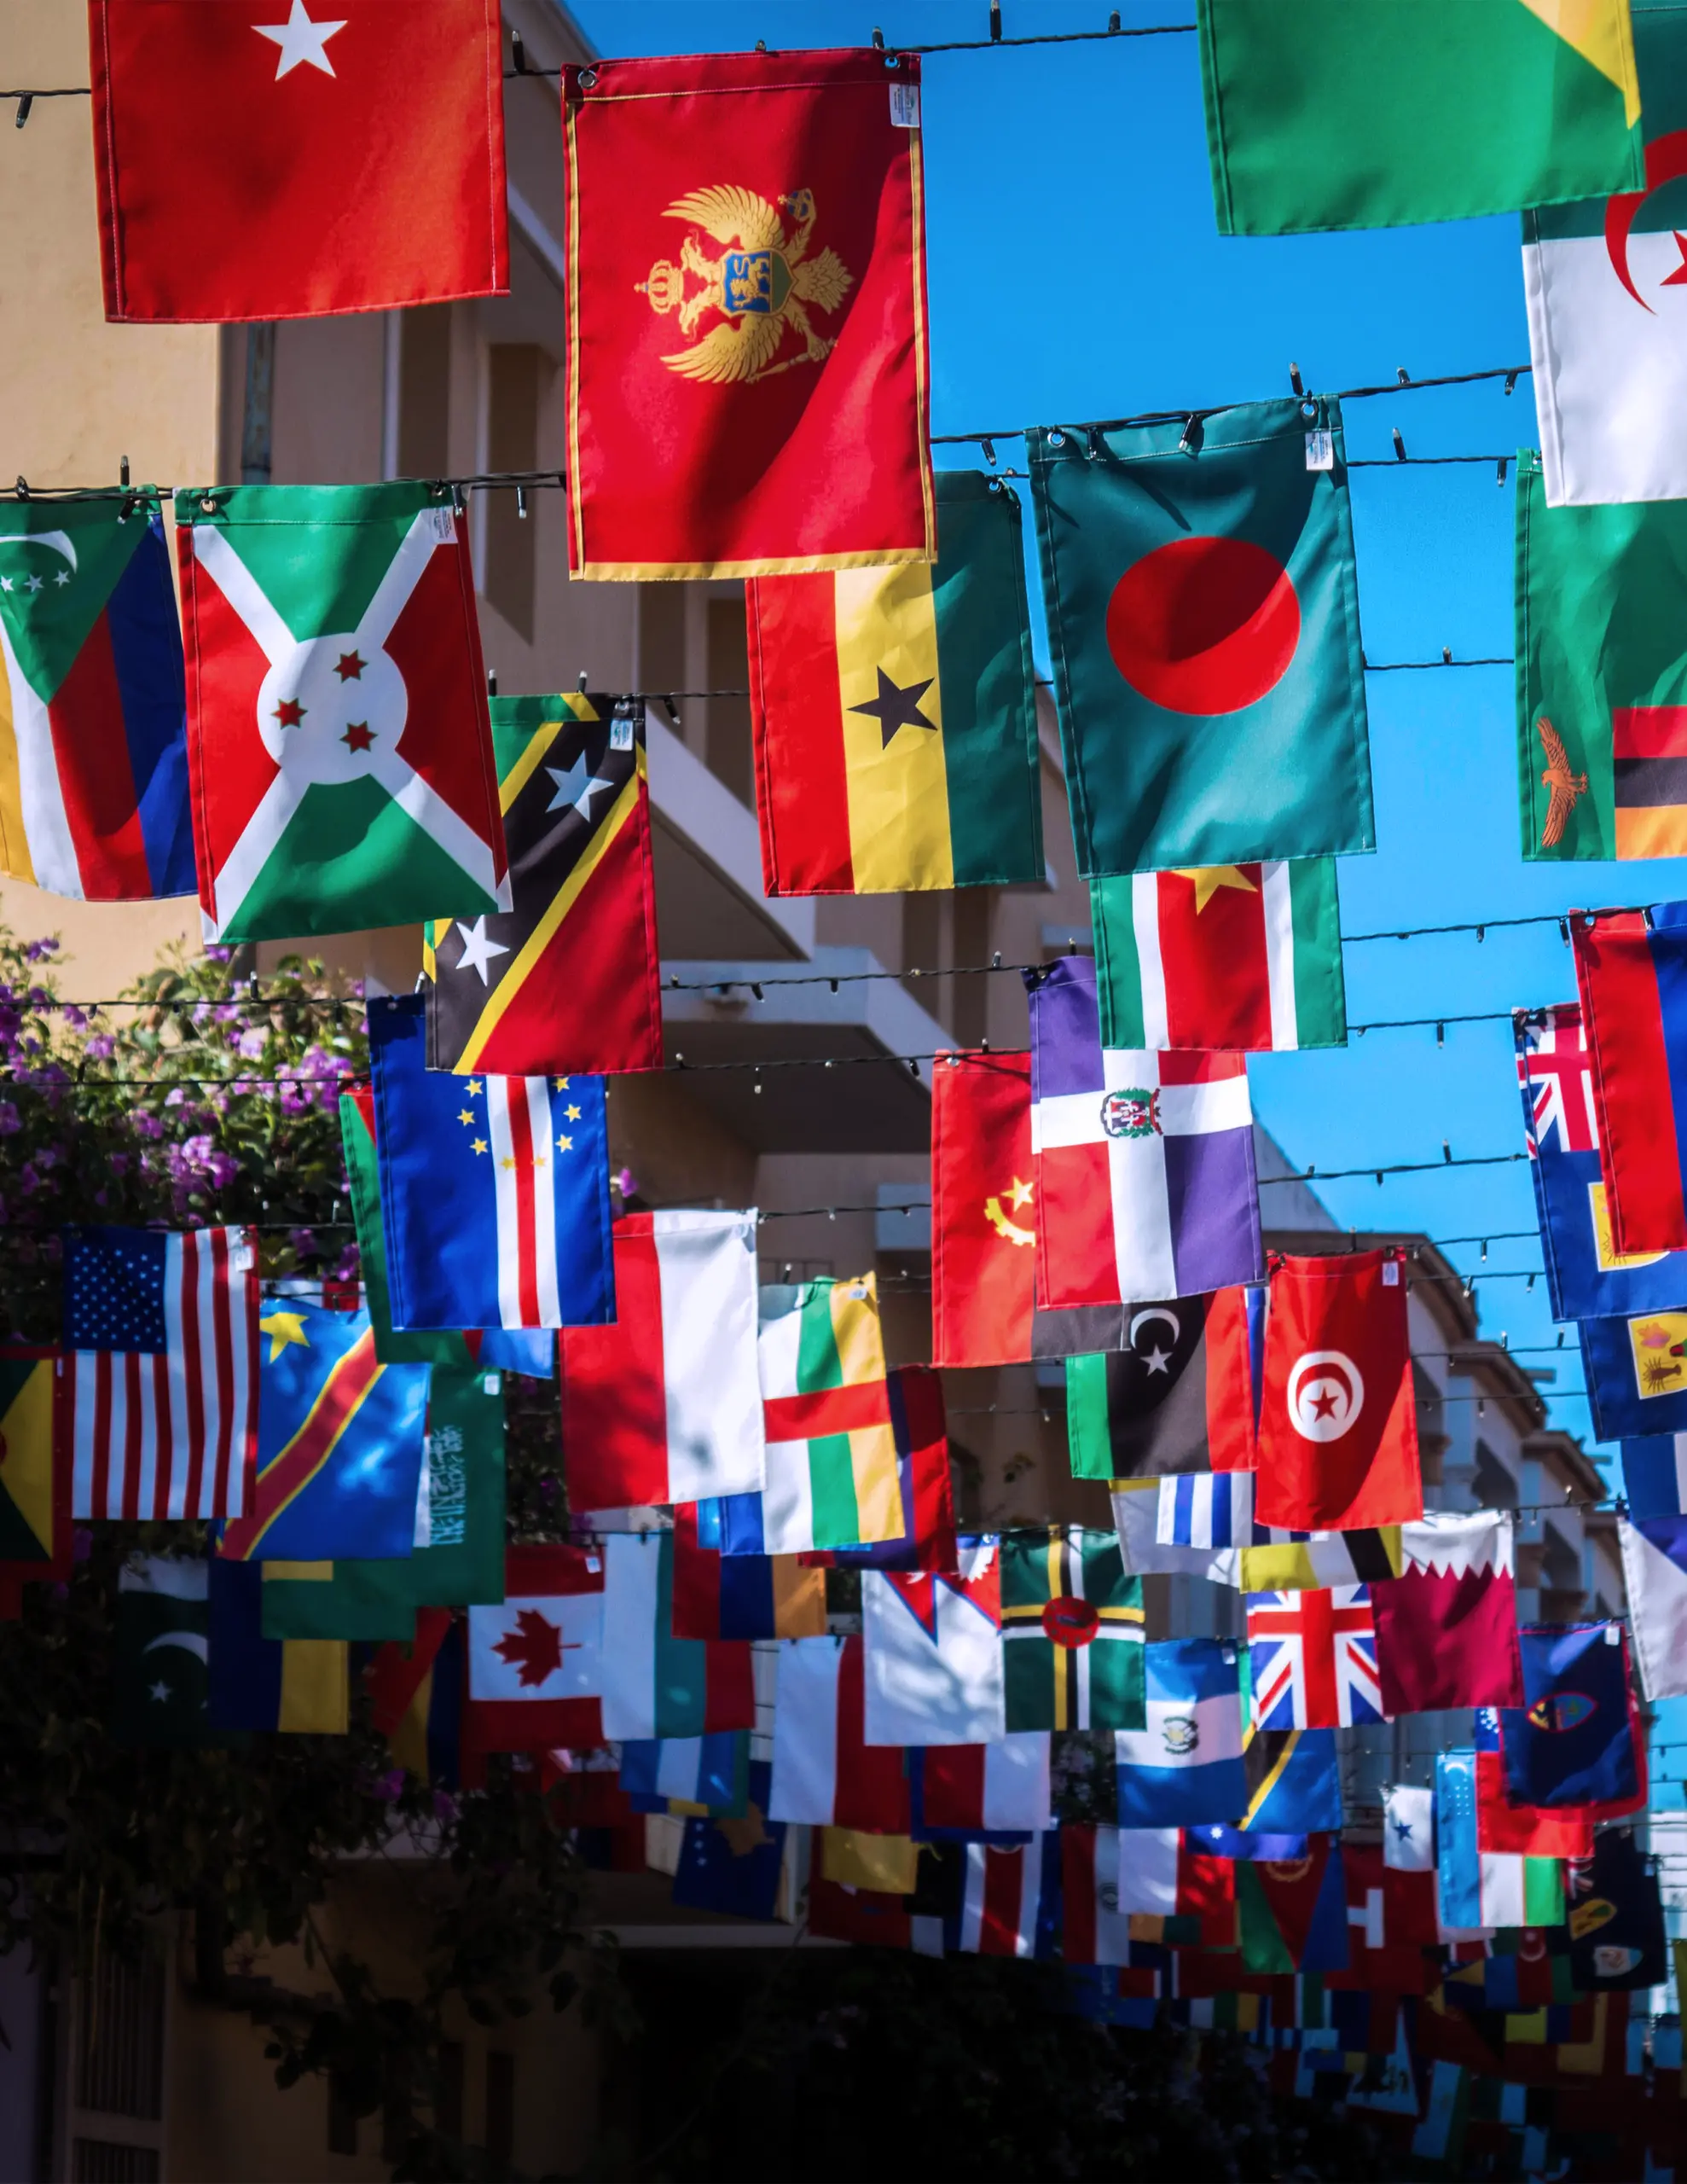 Image of various flags from countries around the world.